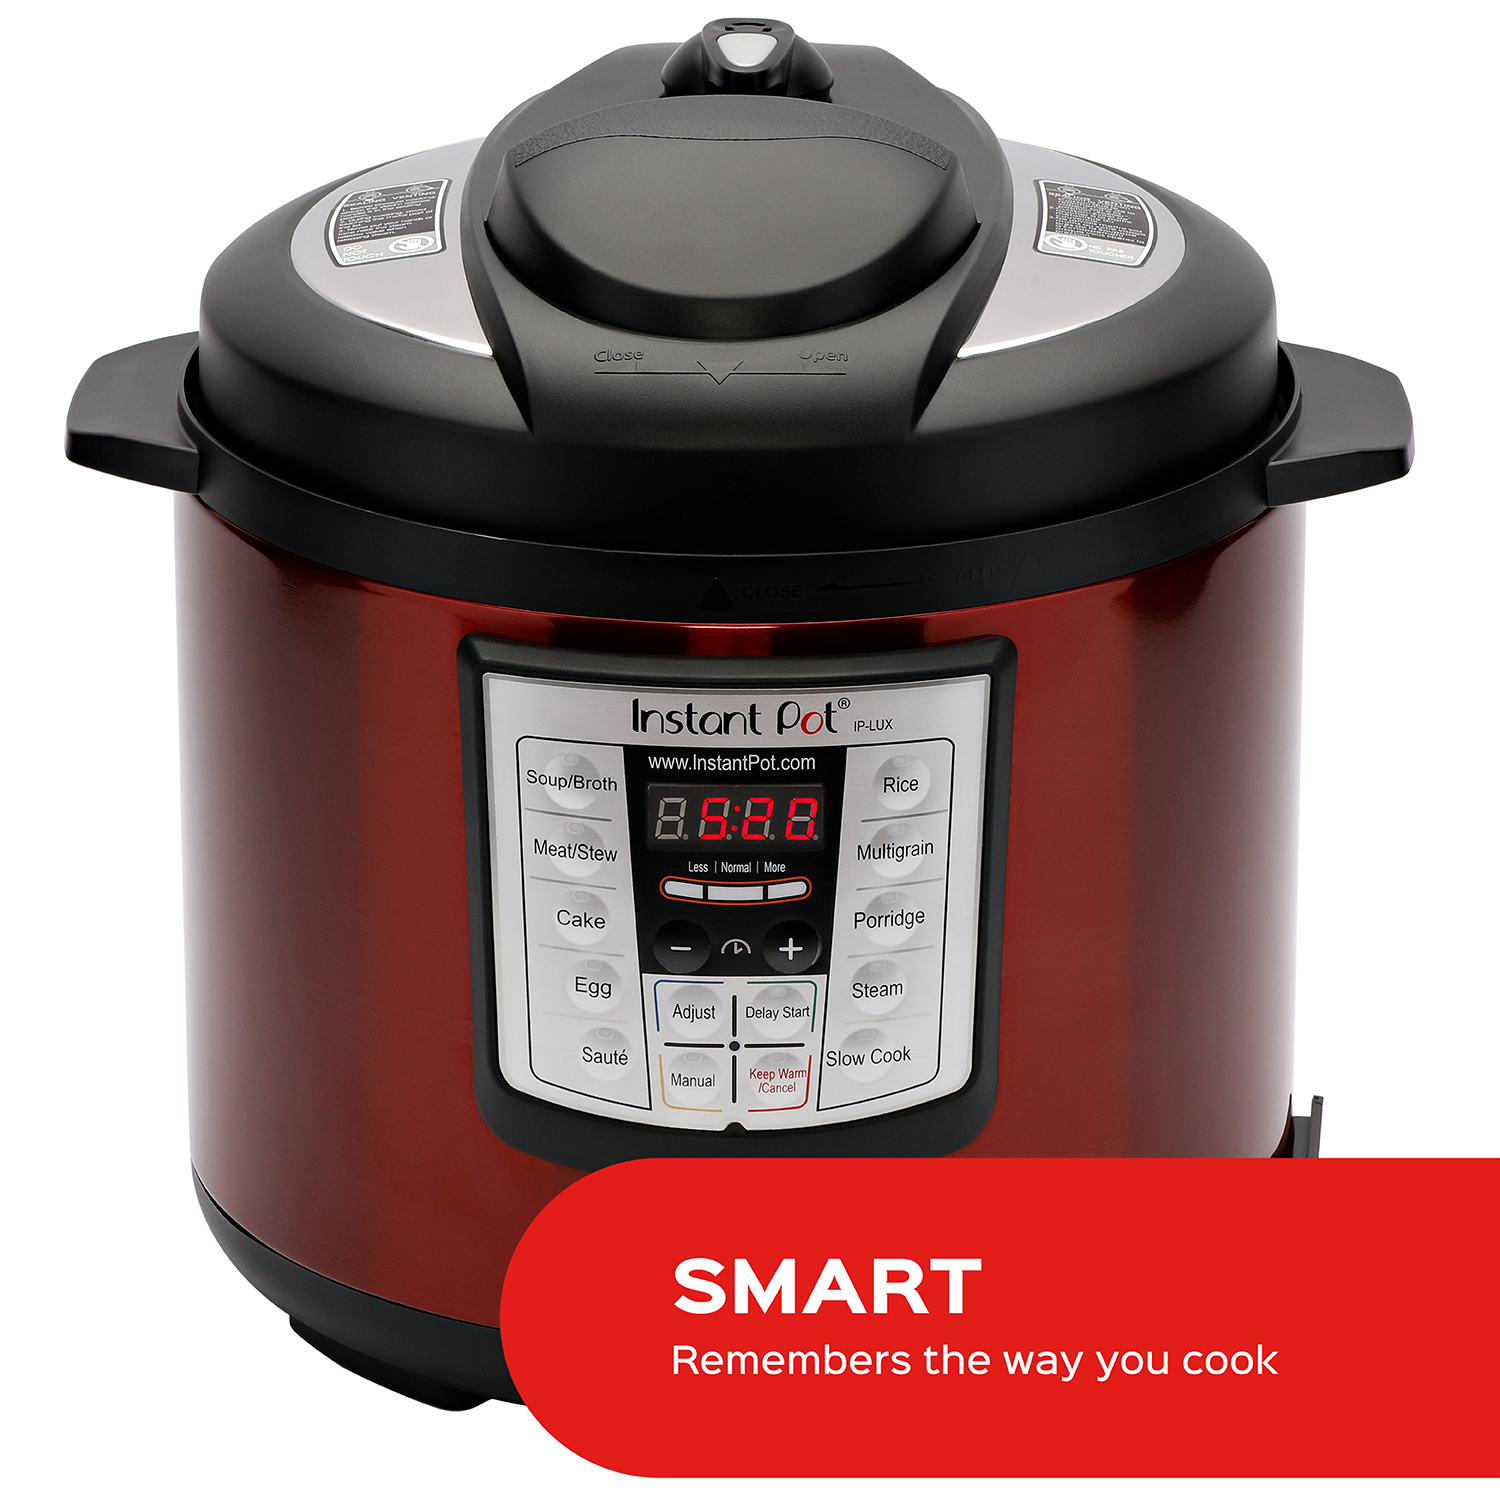 Instant Pot LUX60 Red Stainless Steel 6 Qt 6-in-1 Multi-Use Programmable Pressure Cooker, Slow Cooker, Rice Cooker, Saute, Steamer, and Warmer - image 2 of 8